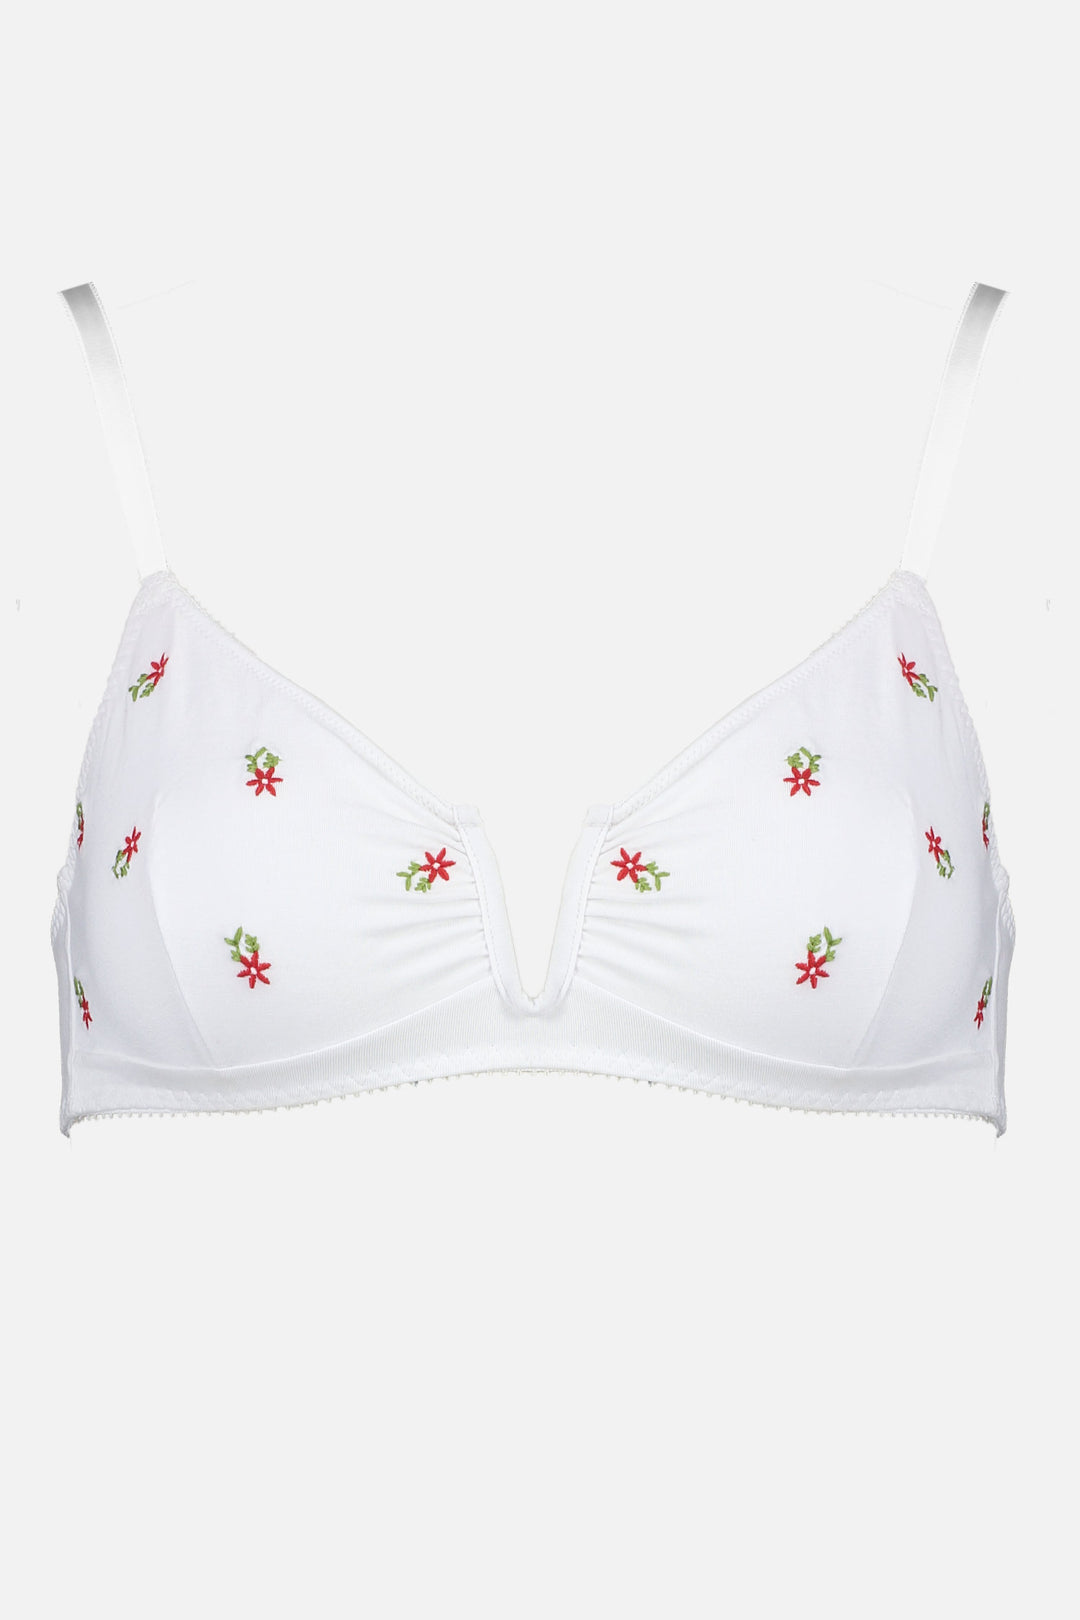 Videris Lingerie Angela wire free white soft cup bra in embroidered TENCEL™ features a triangle shaped cup and front gathers